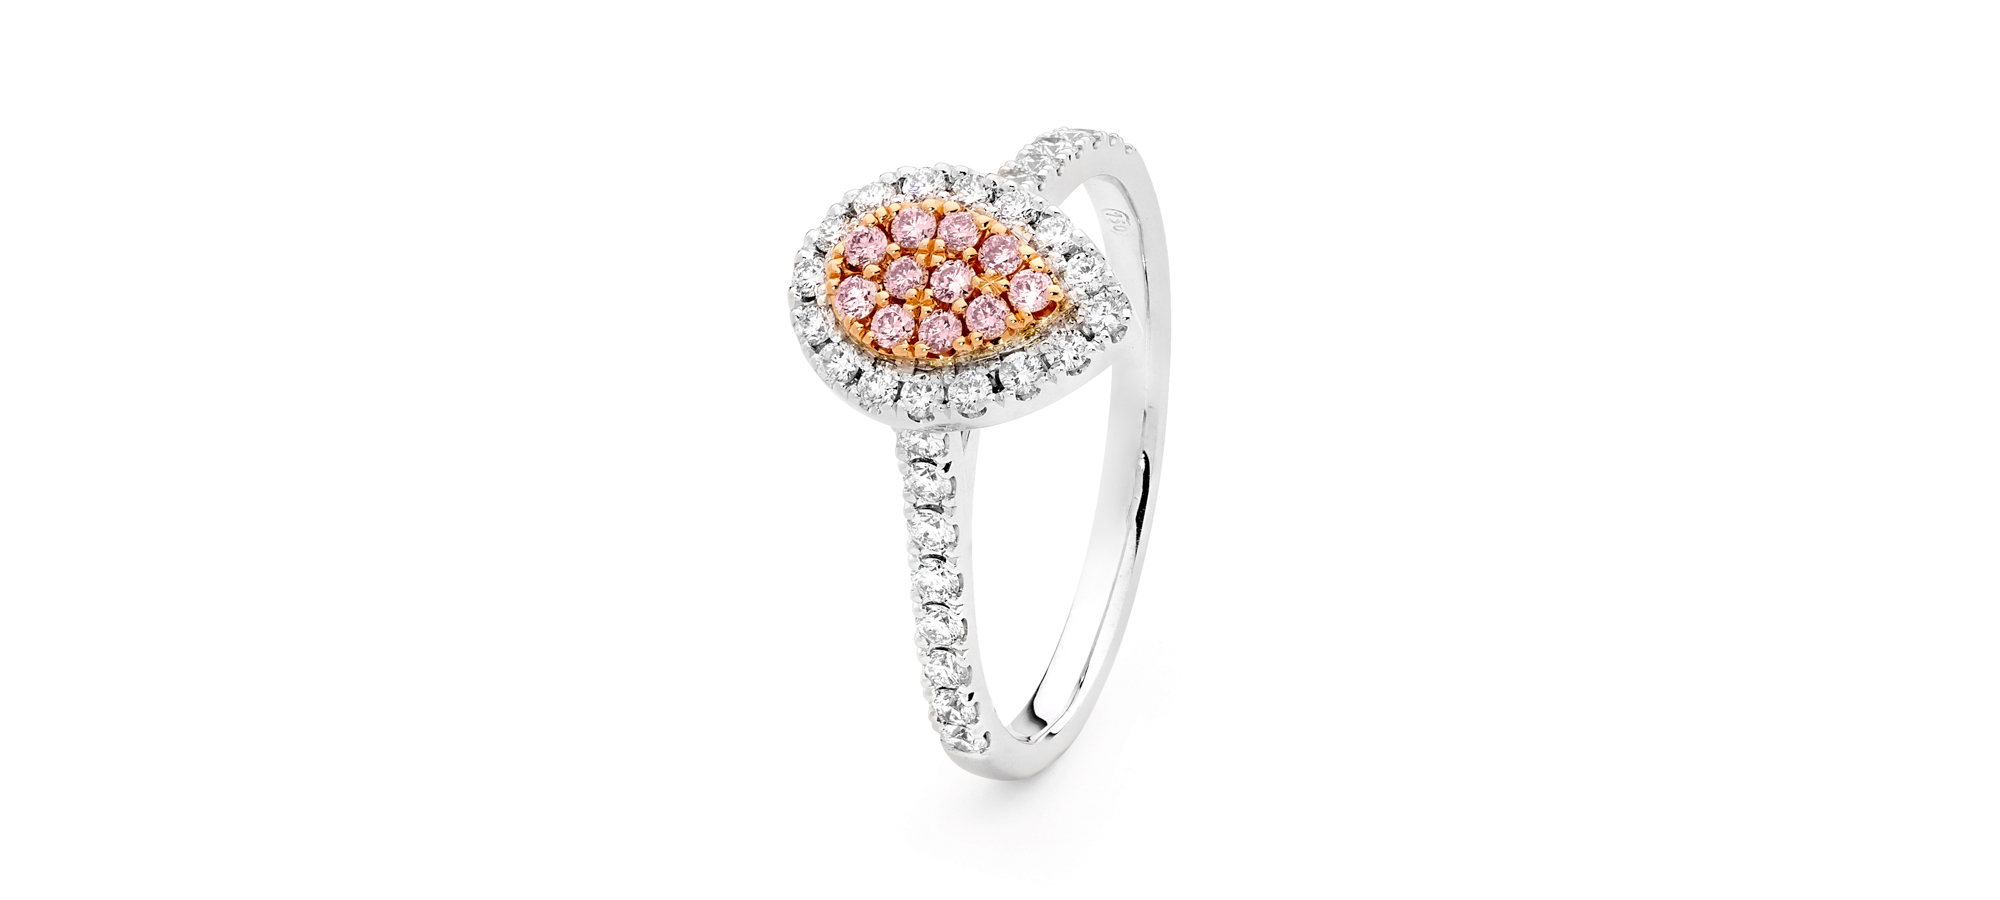 Pink Diamonds: Why They’re So Special, and Why We Can’t Get Enough! | Pink Diamond Melbourne